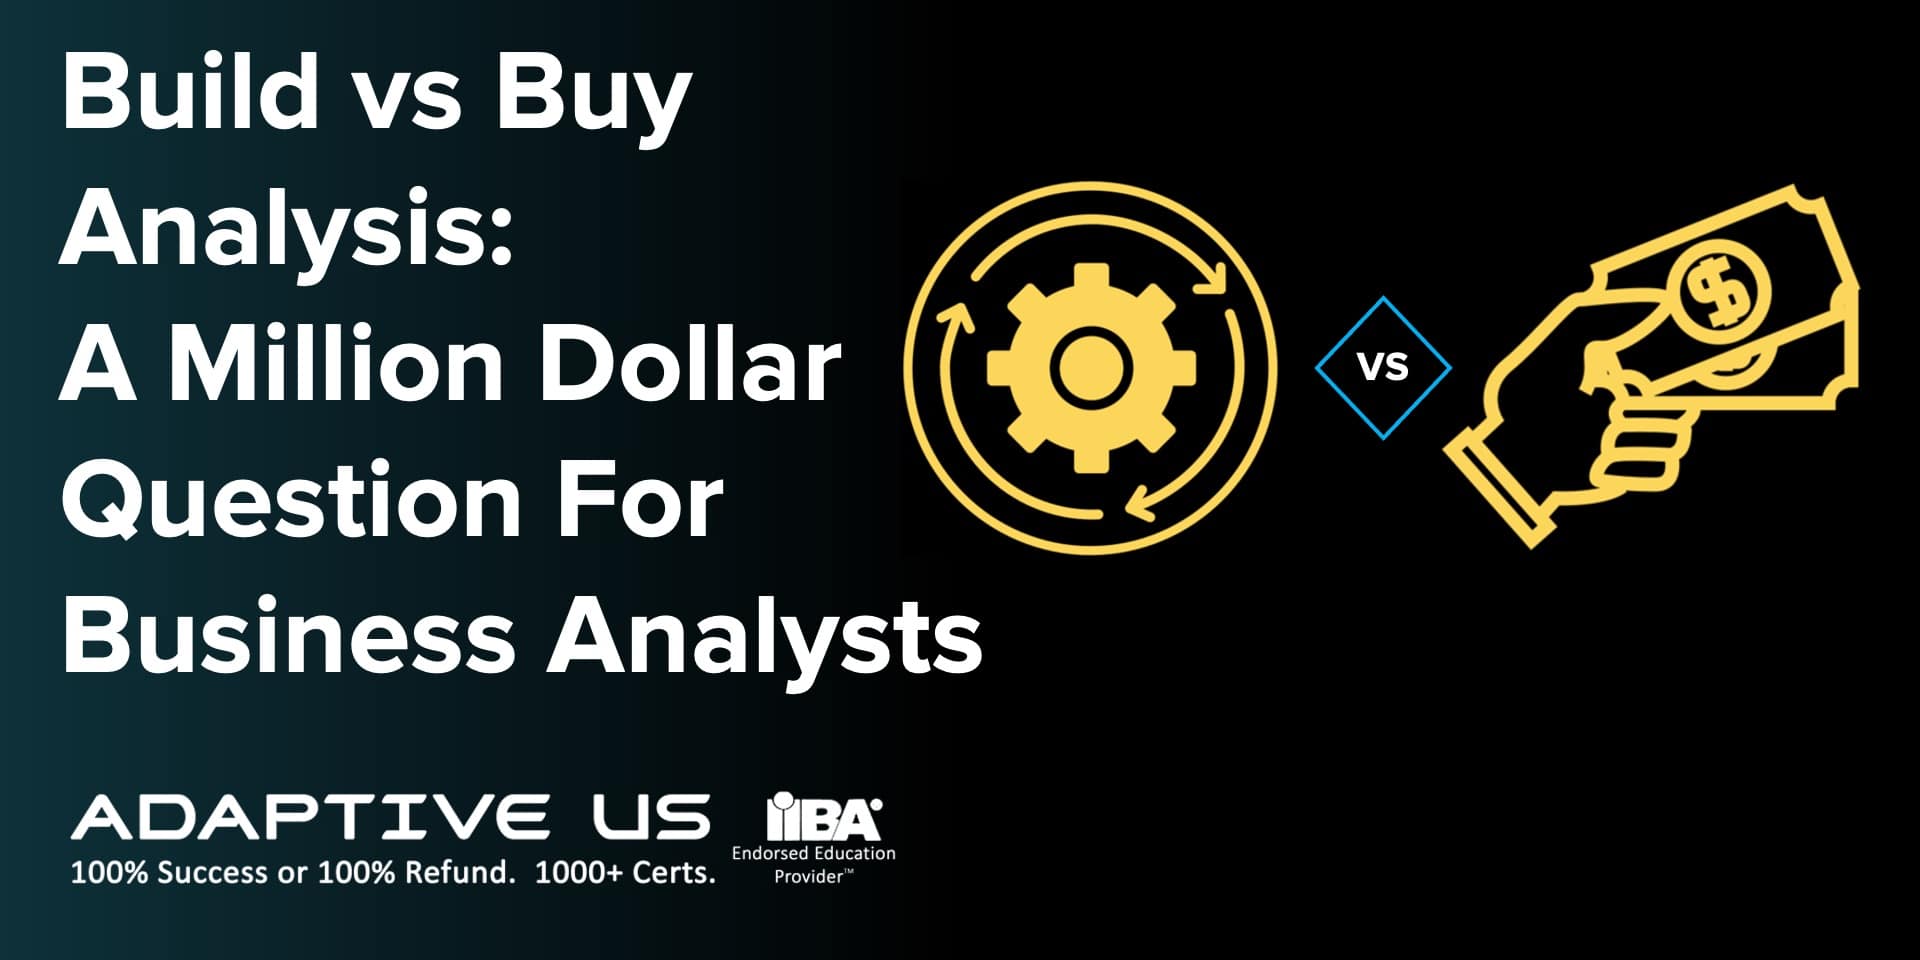 Build versus Buy Analysis- A Million Dollar Question For Business Analysts